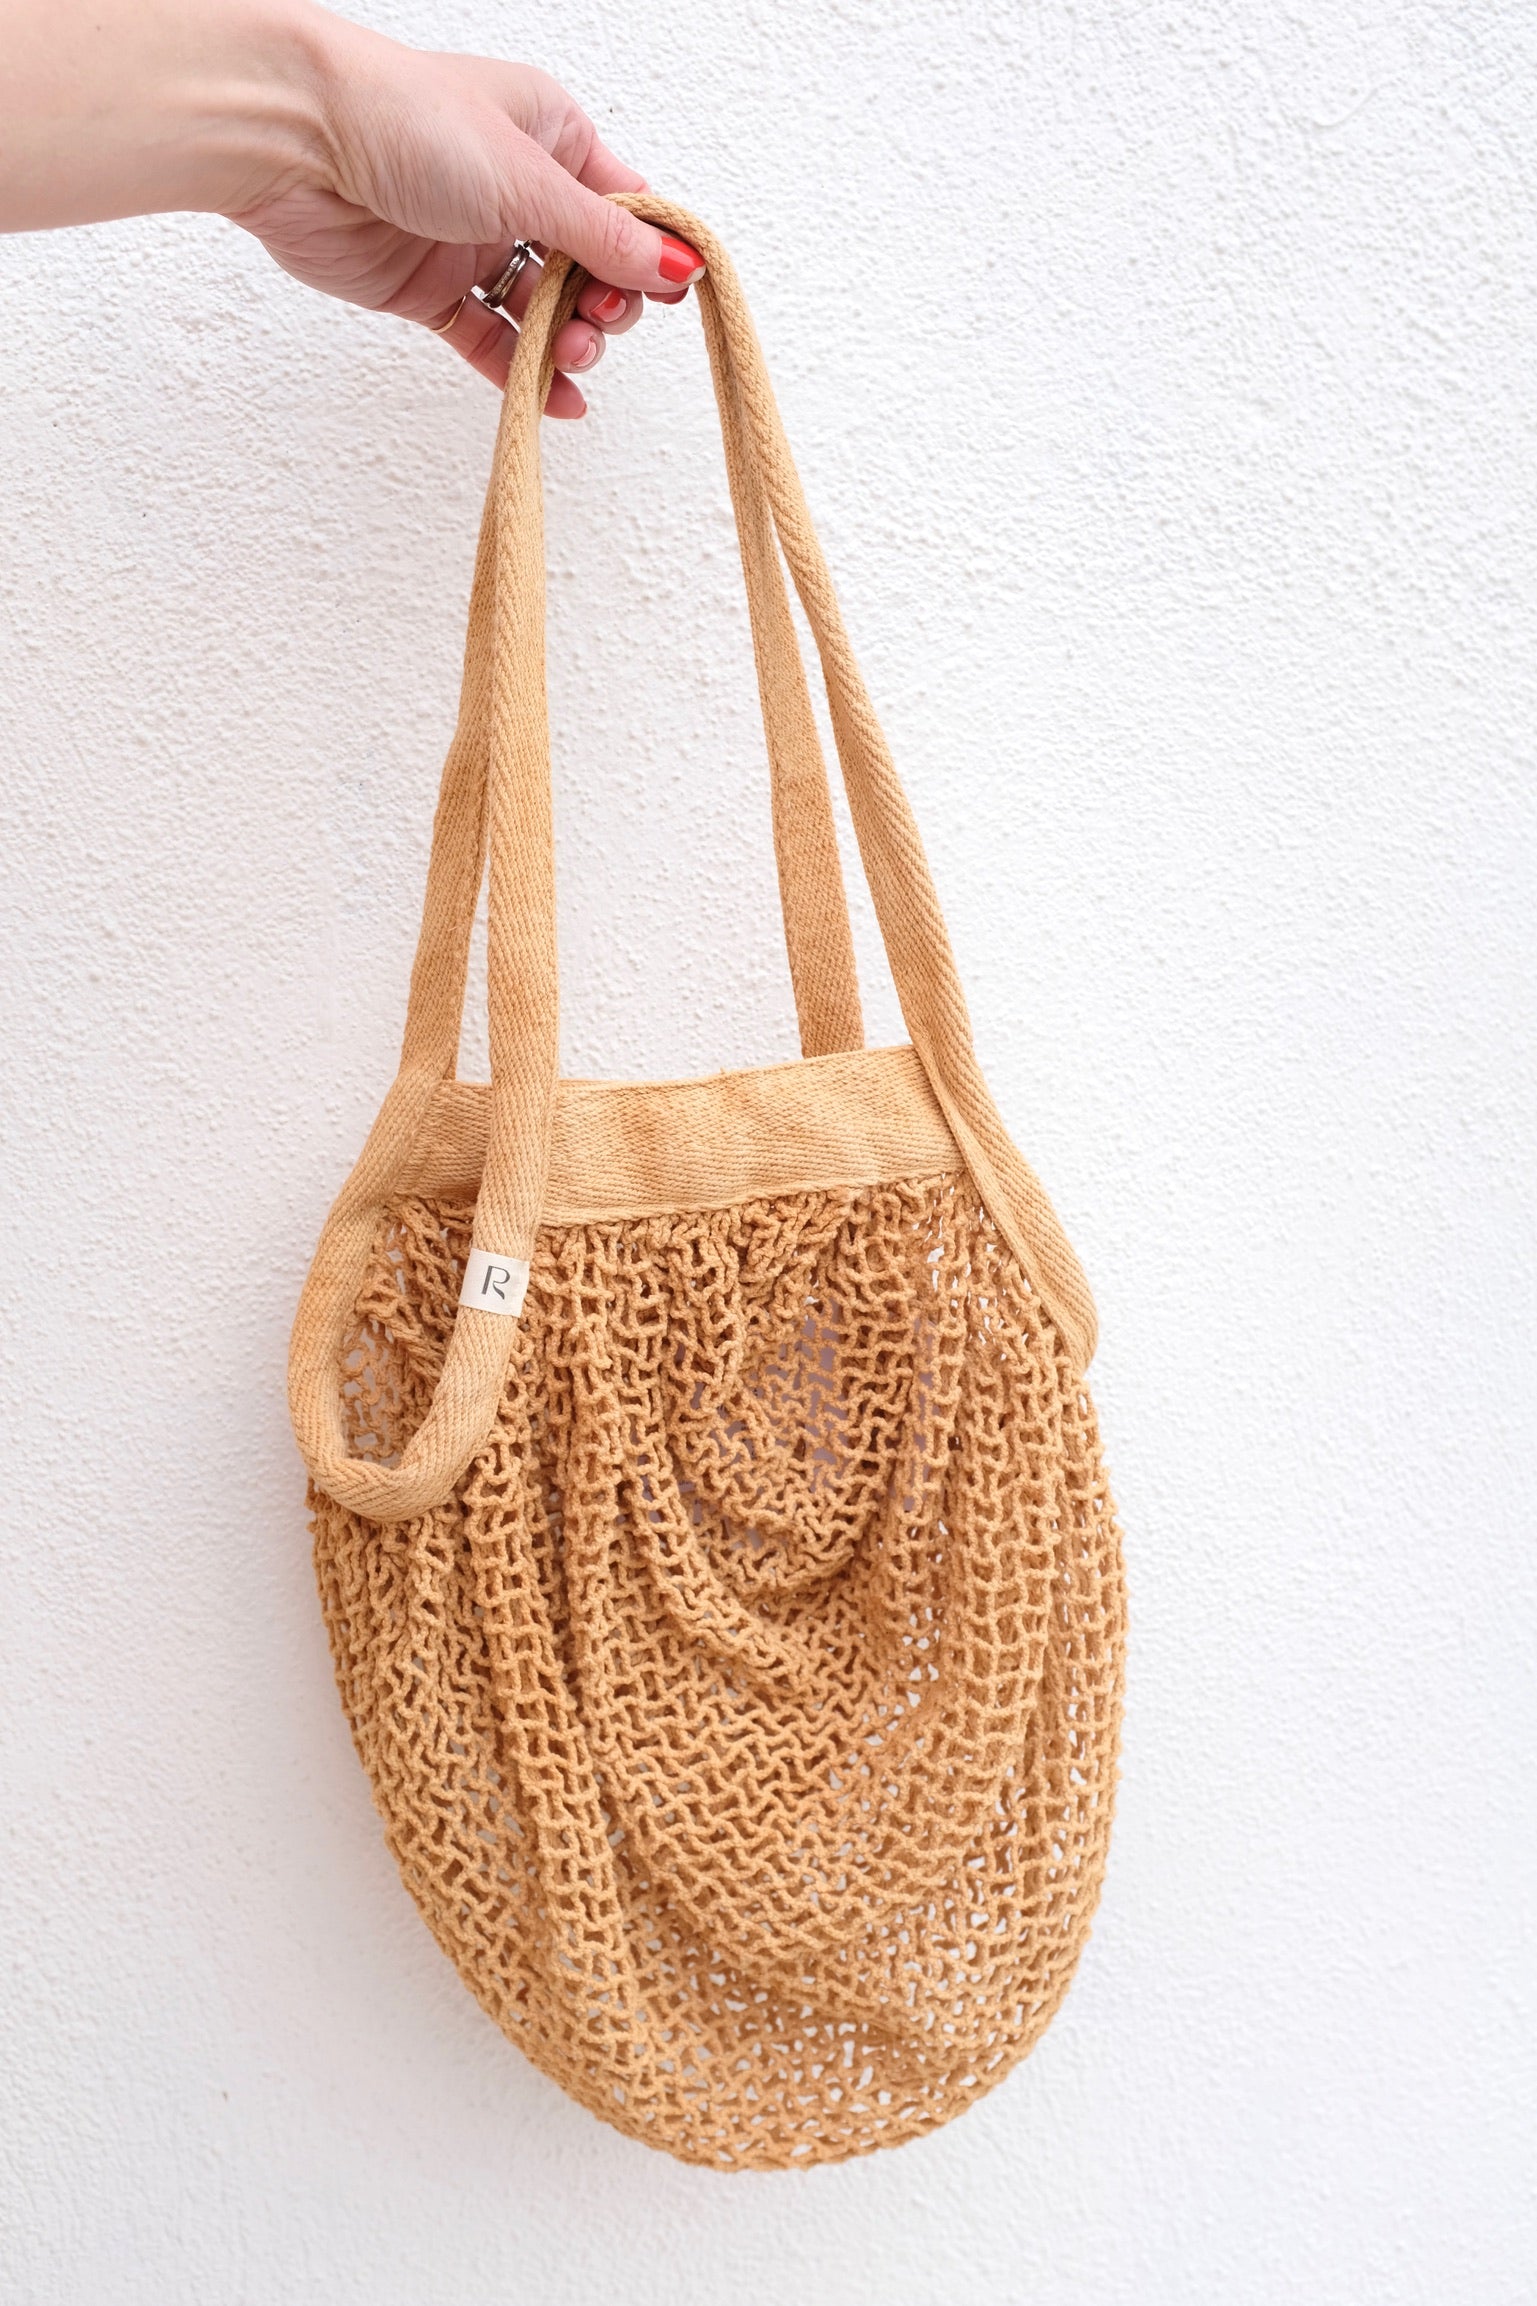 Organic Cotton Market Bag / Sycamore Leaves